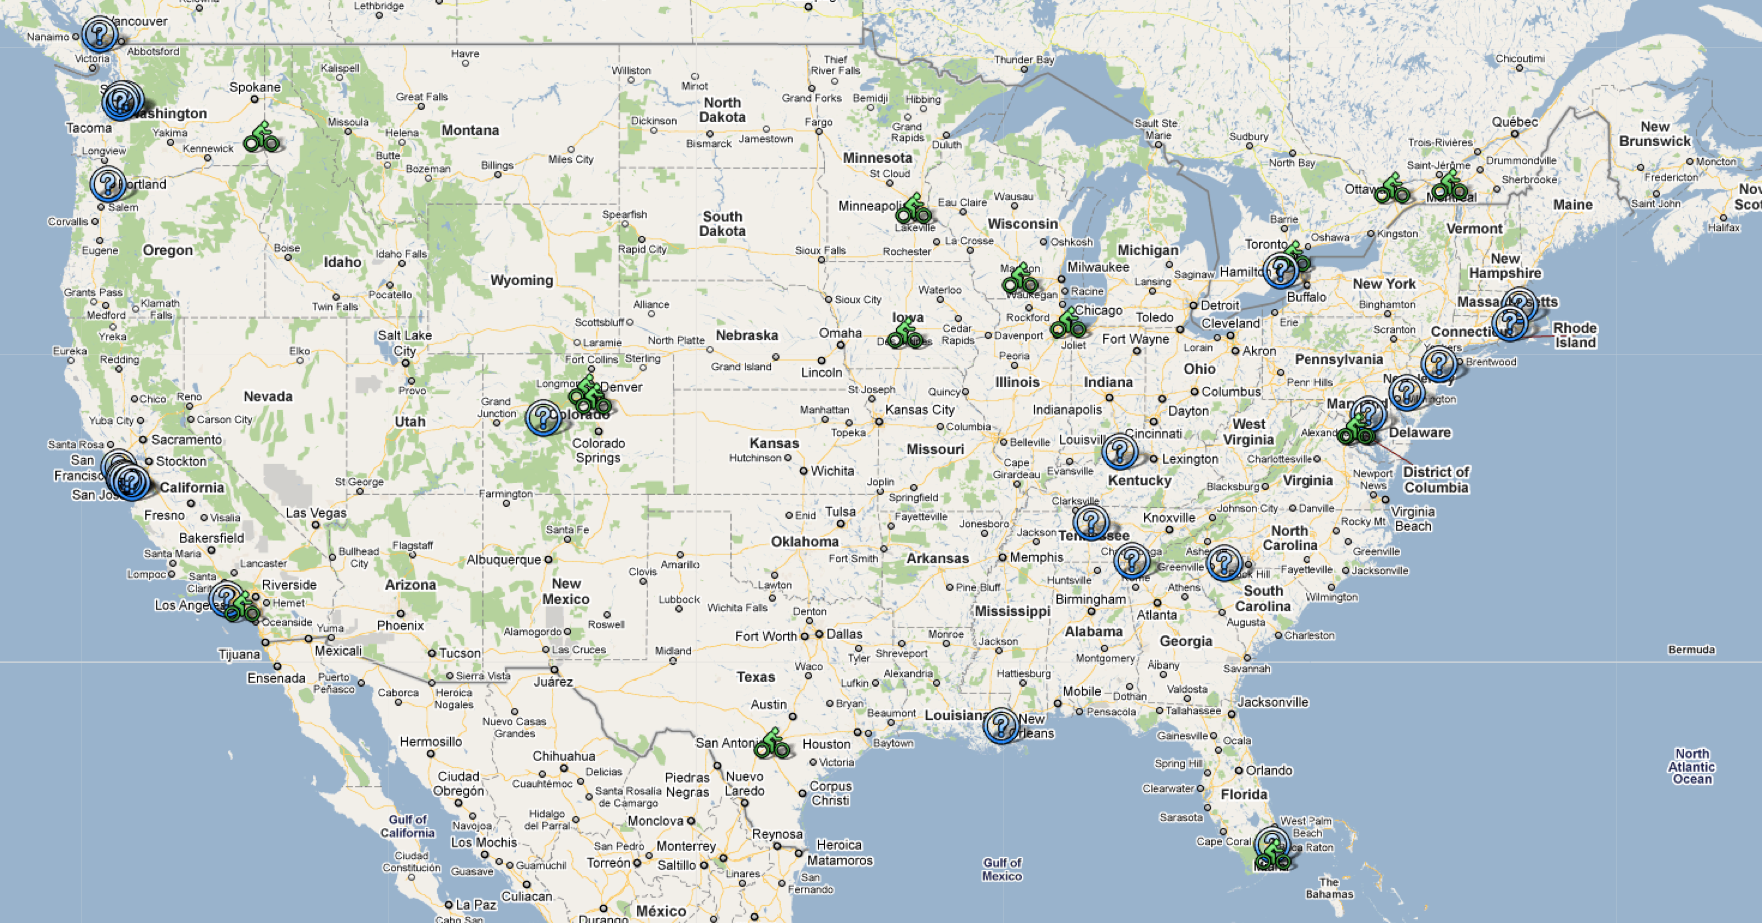 U.S. map showing all current and possible bike share programs (The Bike-sharing Blog)